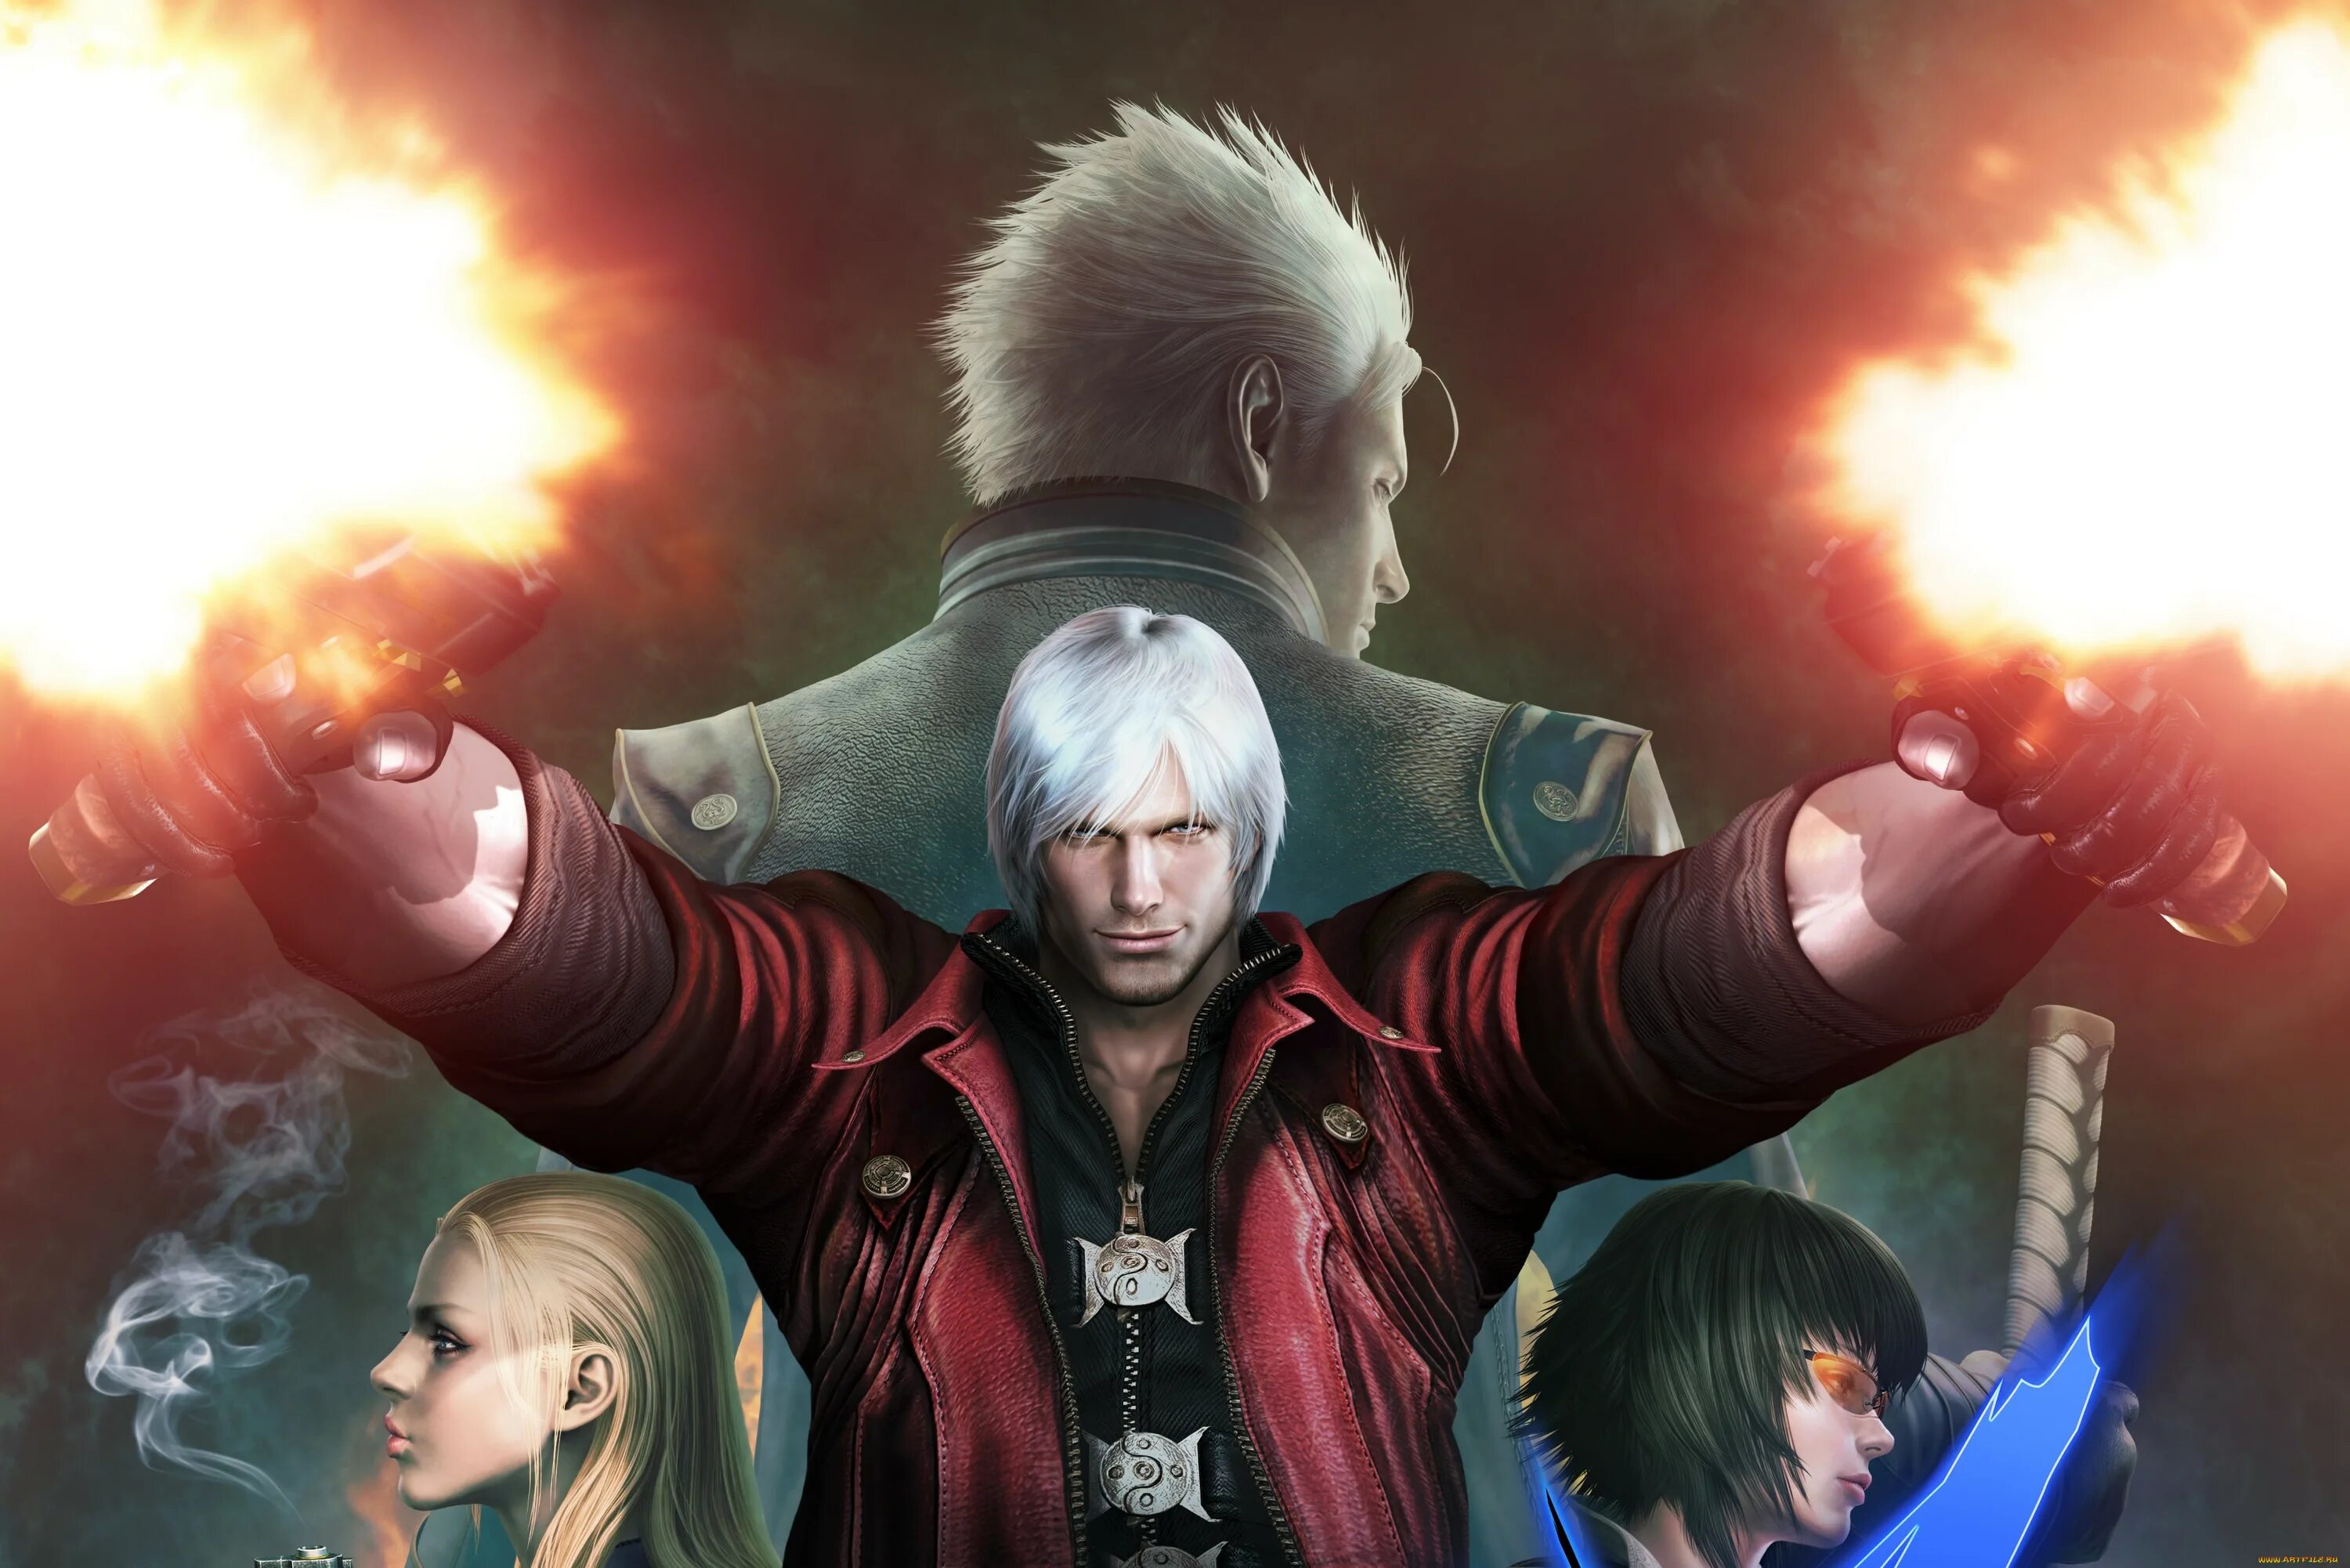 Devil may cry game. Данте Devil May Cry. Данте DMC 4. Данте ДМС 4. Devil May Cry 4 Данте.